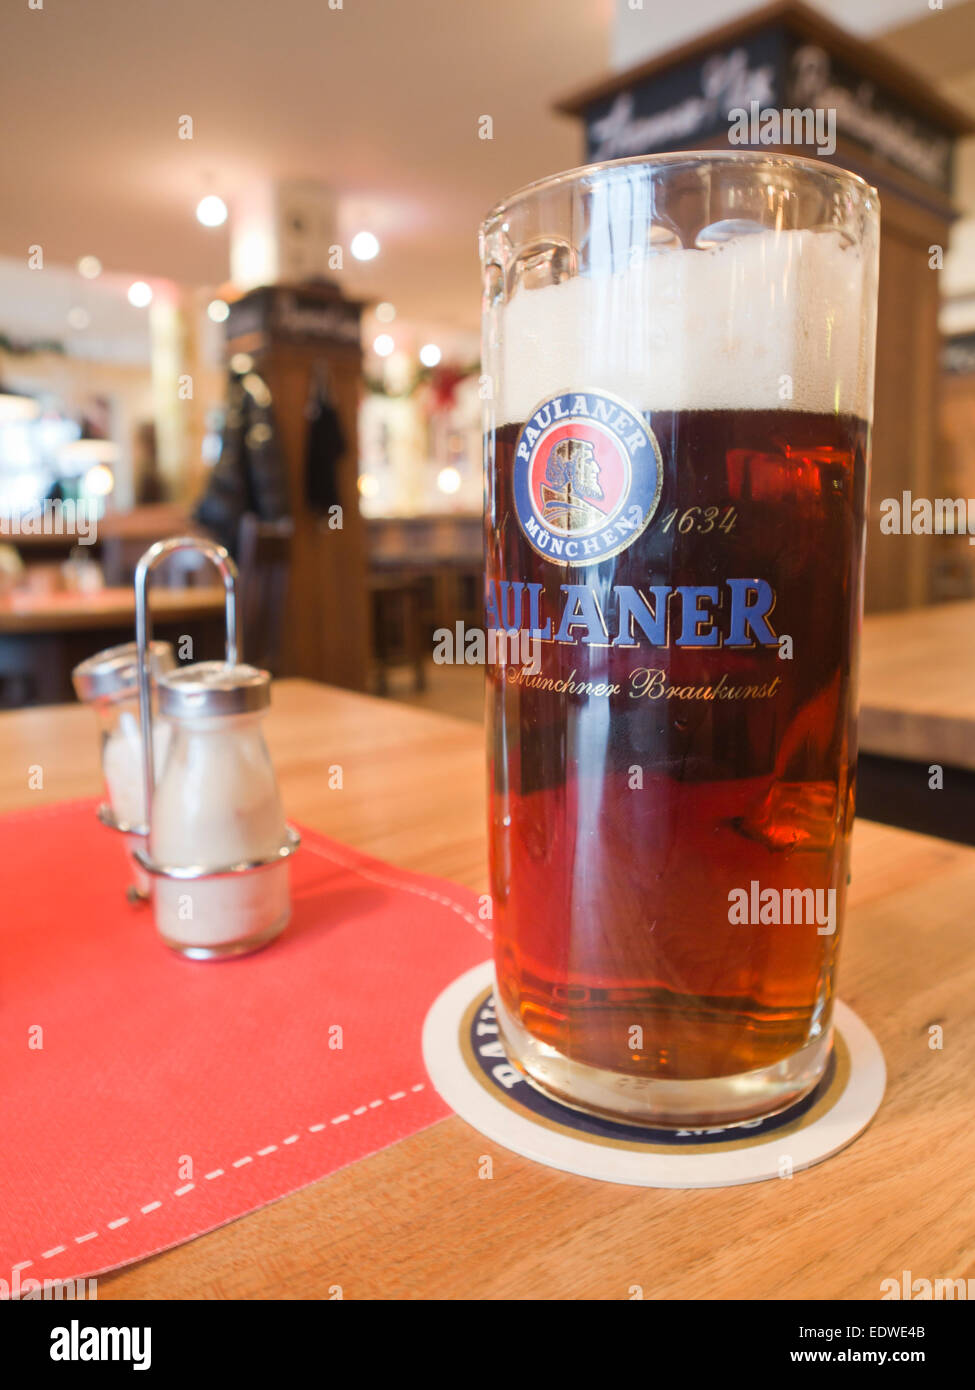 Dunkel Restaurant High Resolution Stock Photography and Images - Alamy